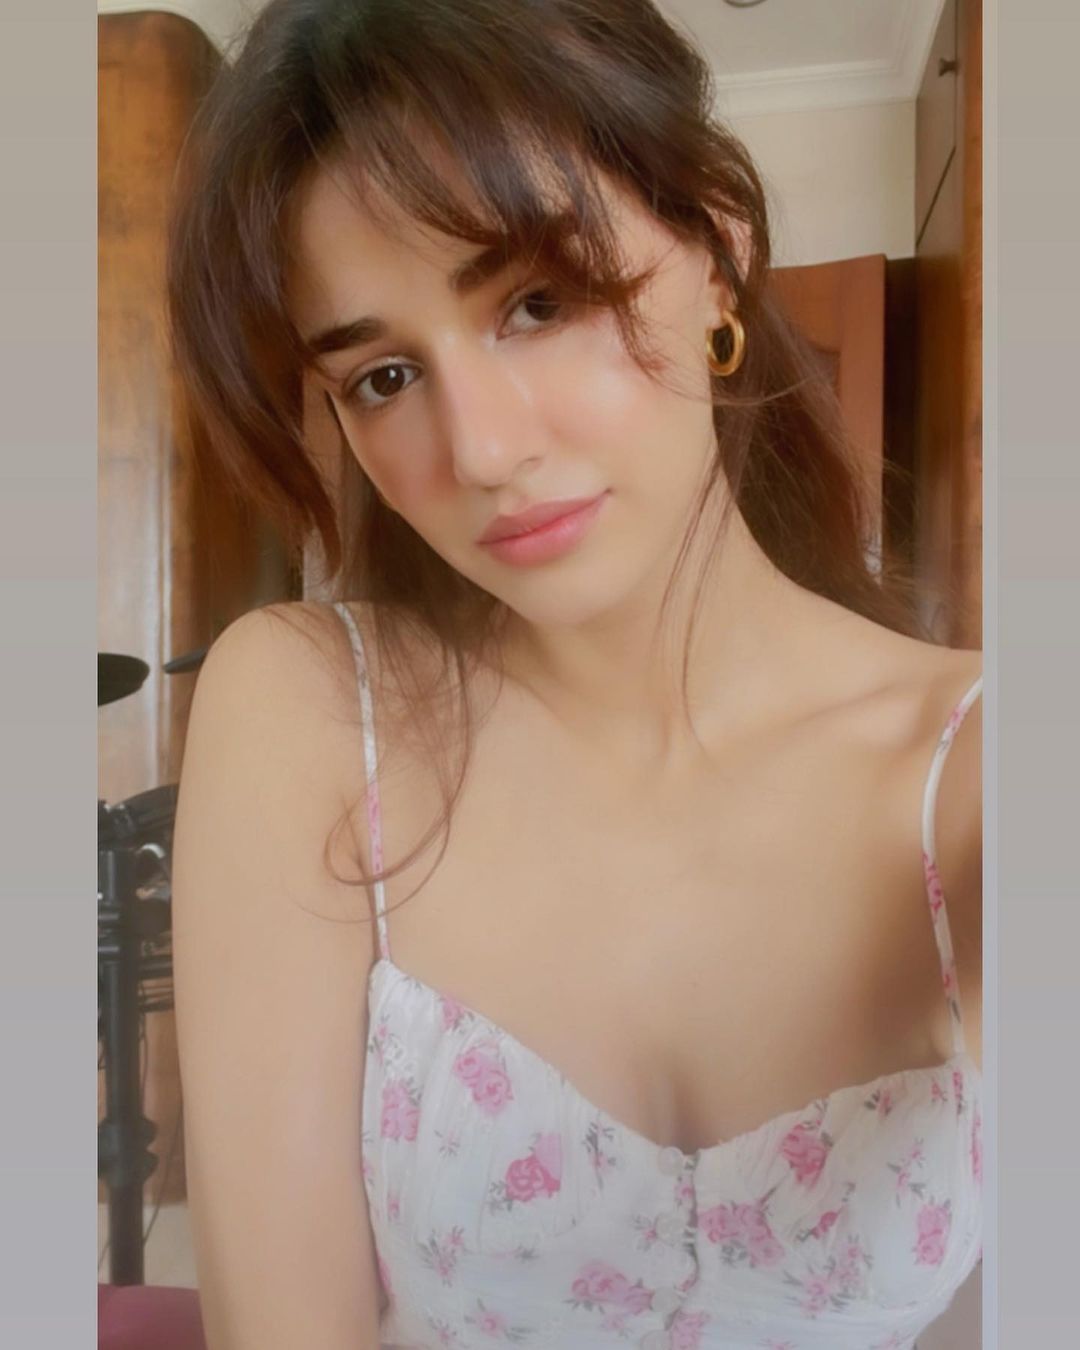 Disha Patani is giving summer goals with her latest photos